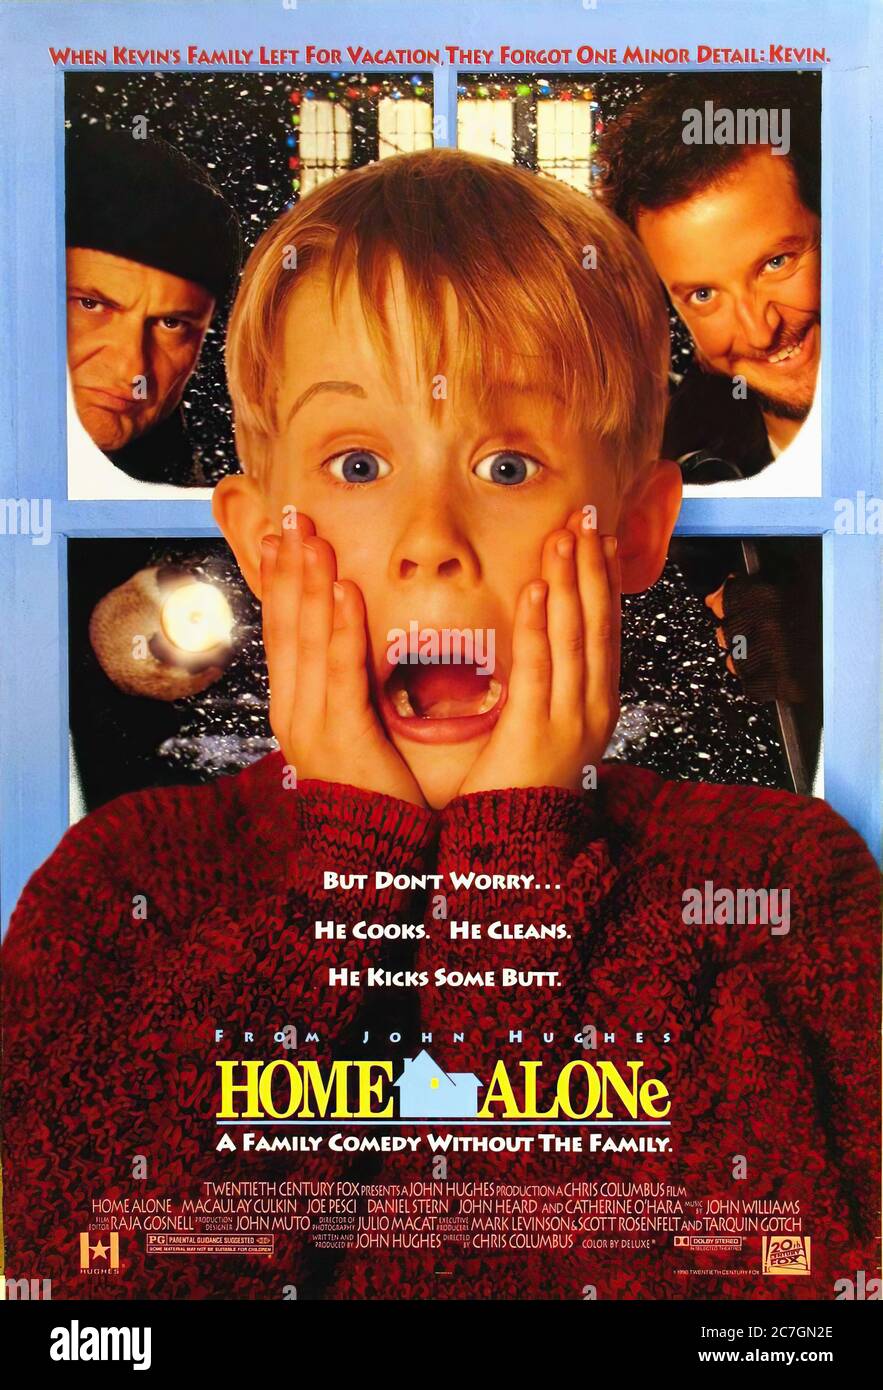 Home Alone - Filmposter Stockfoto